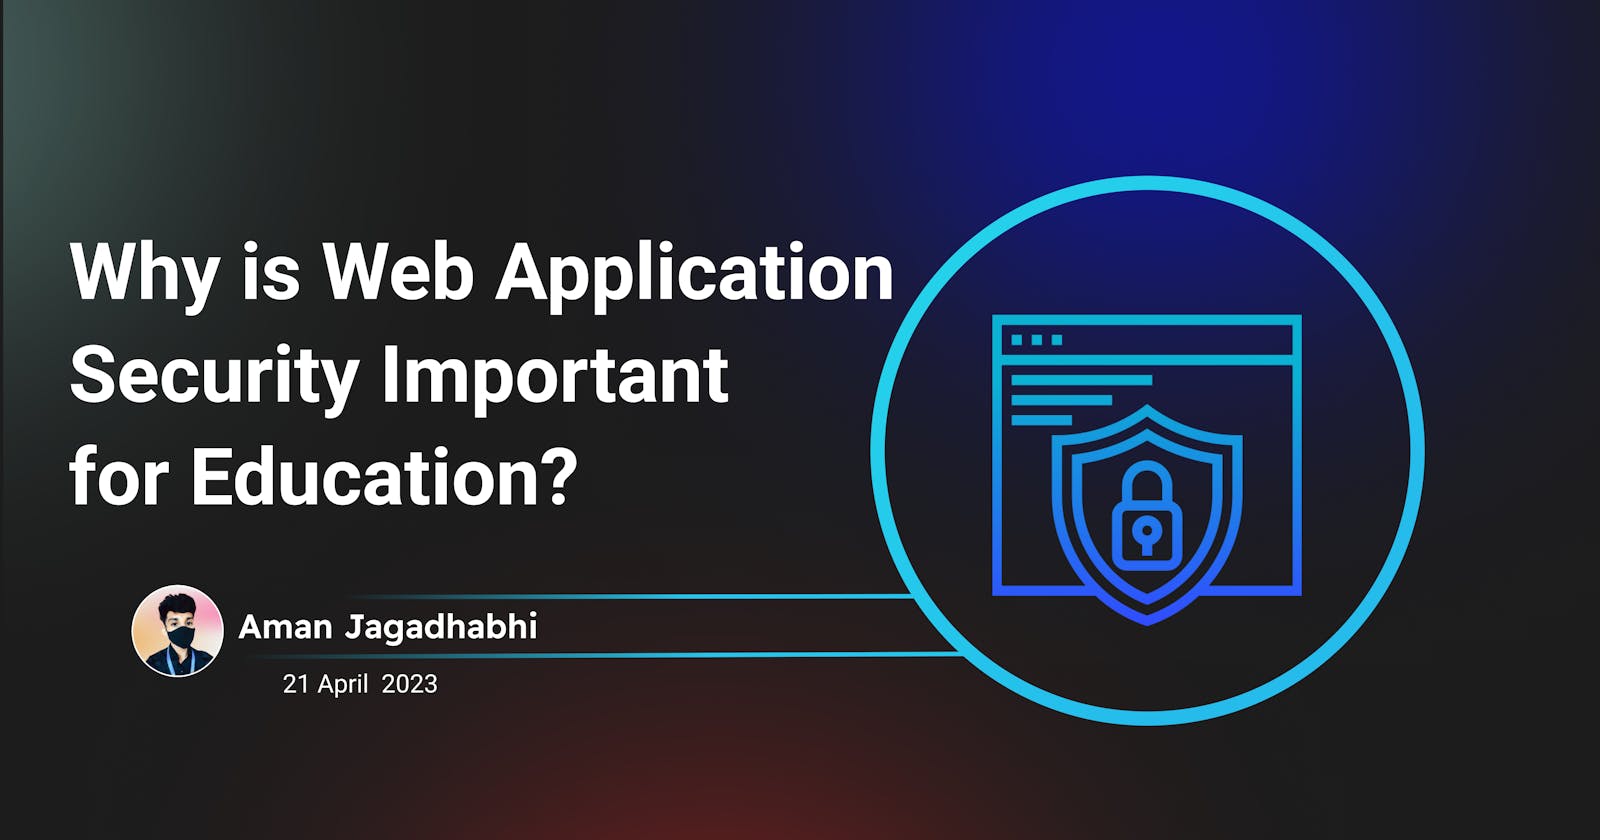 Why is Web Application Security Important for Education?